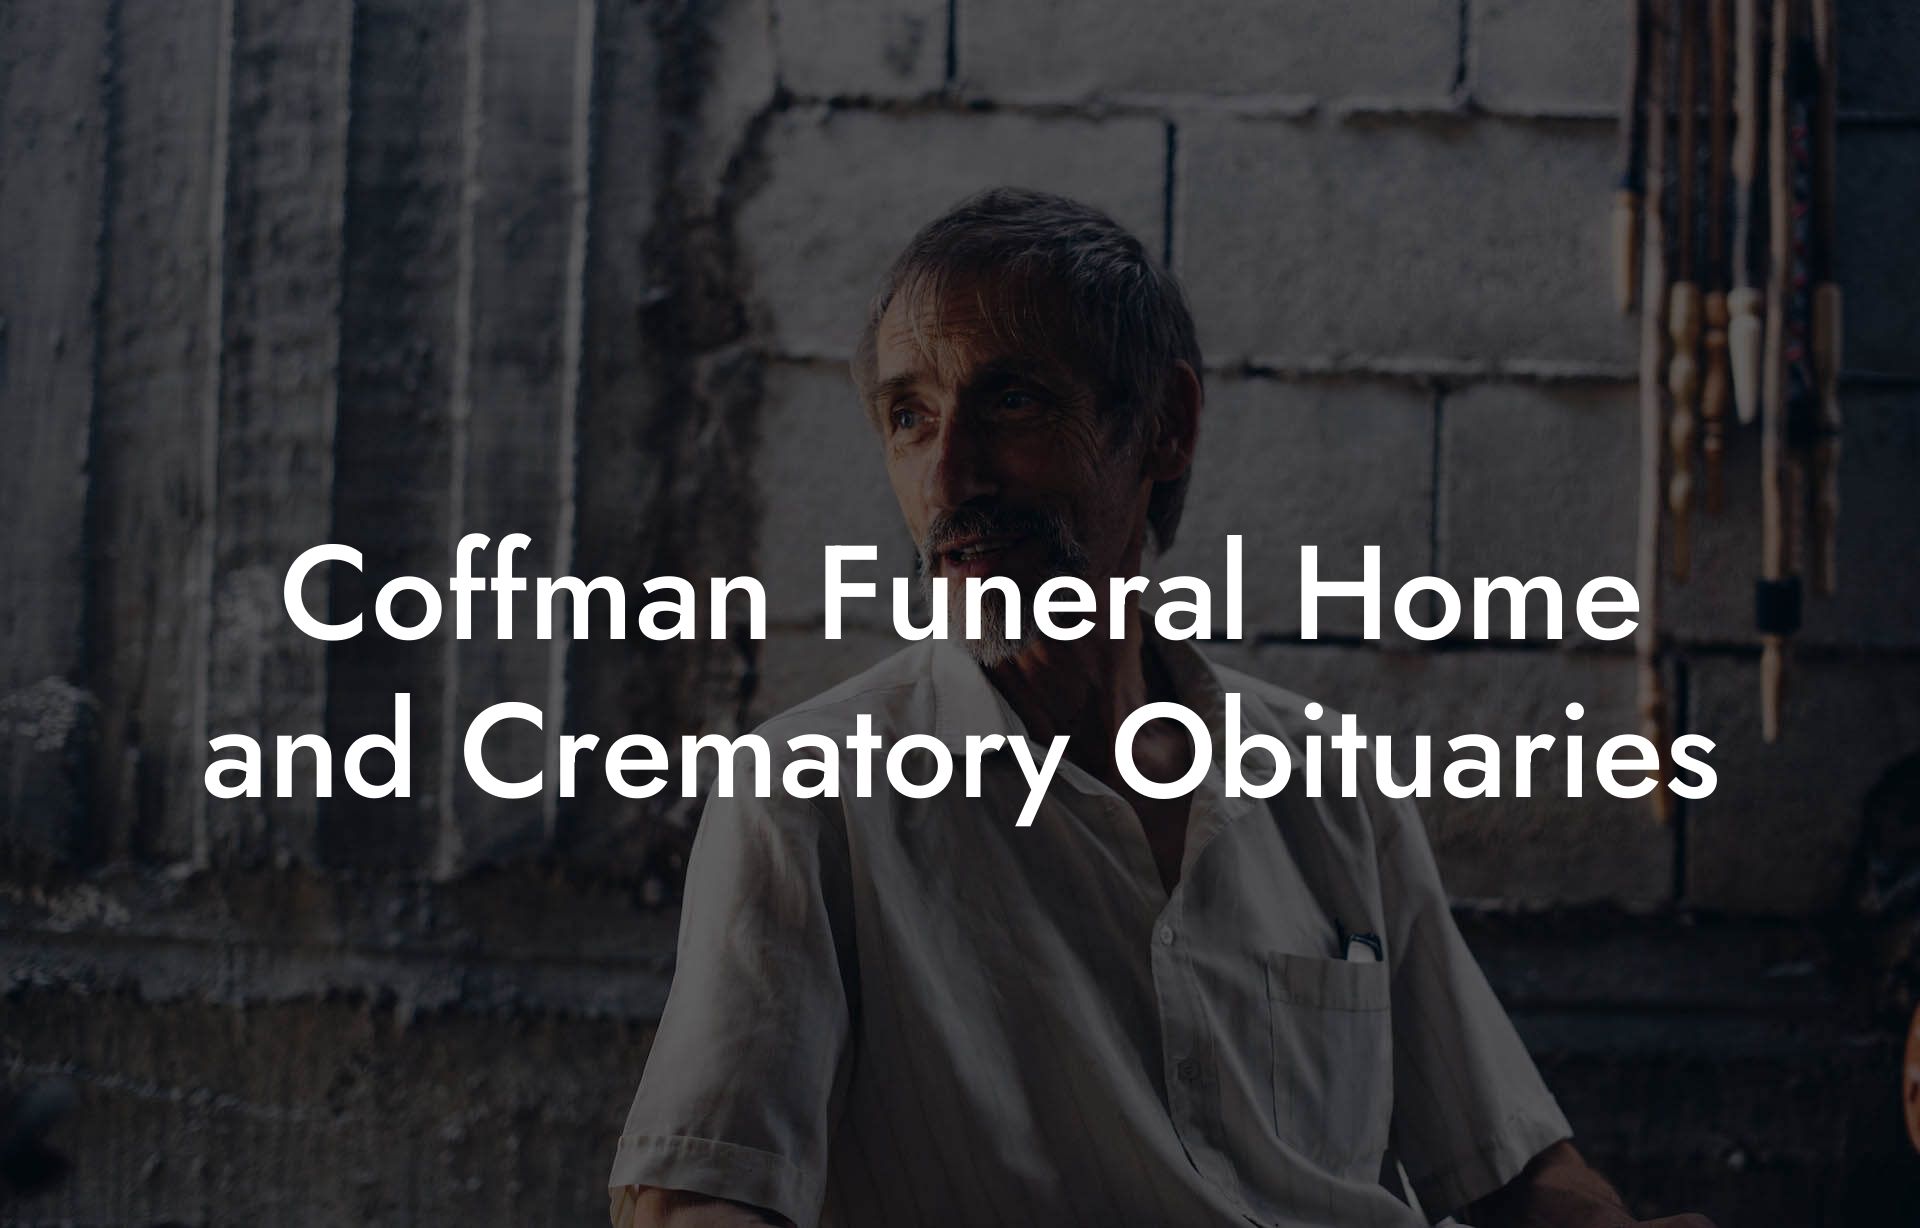 Coffman Funeral Home and Crematory Obituaries